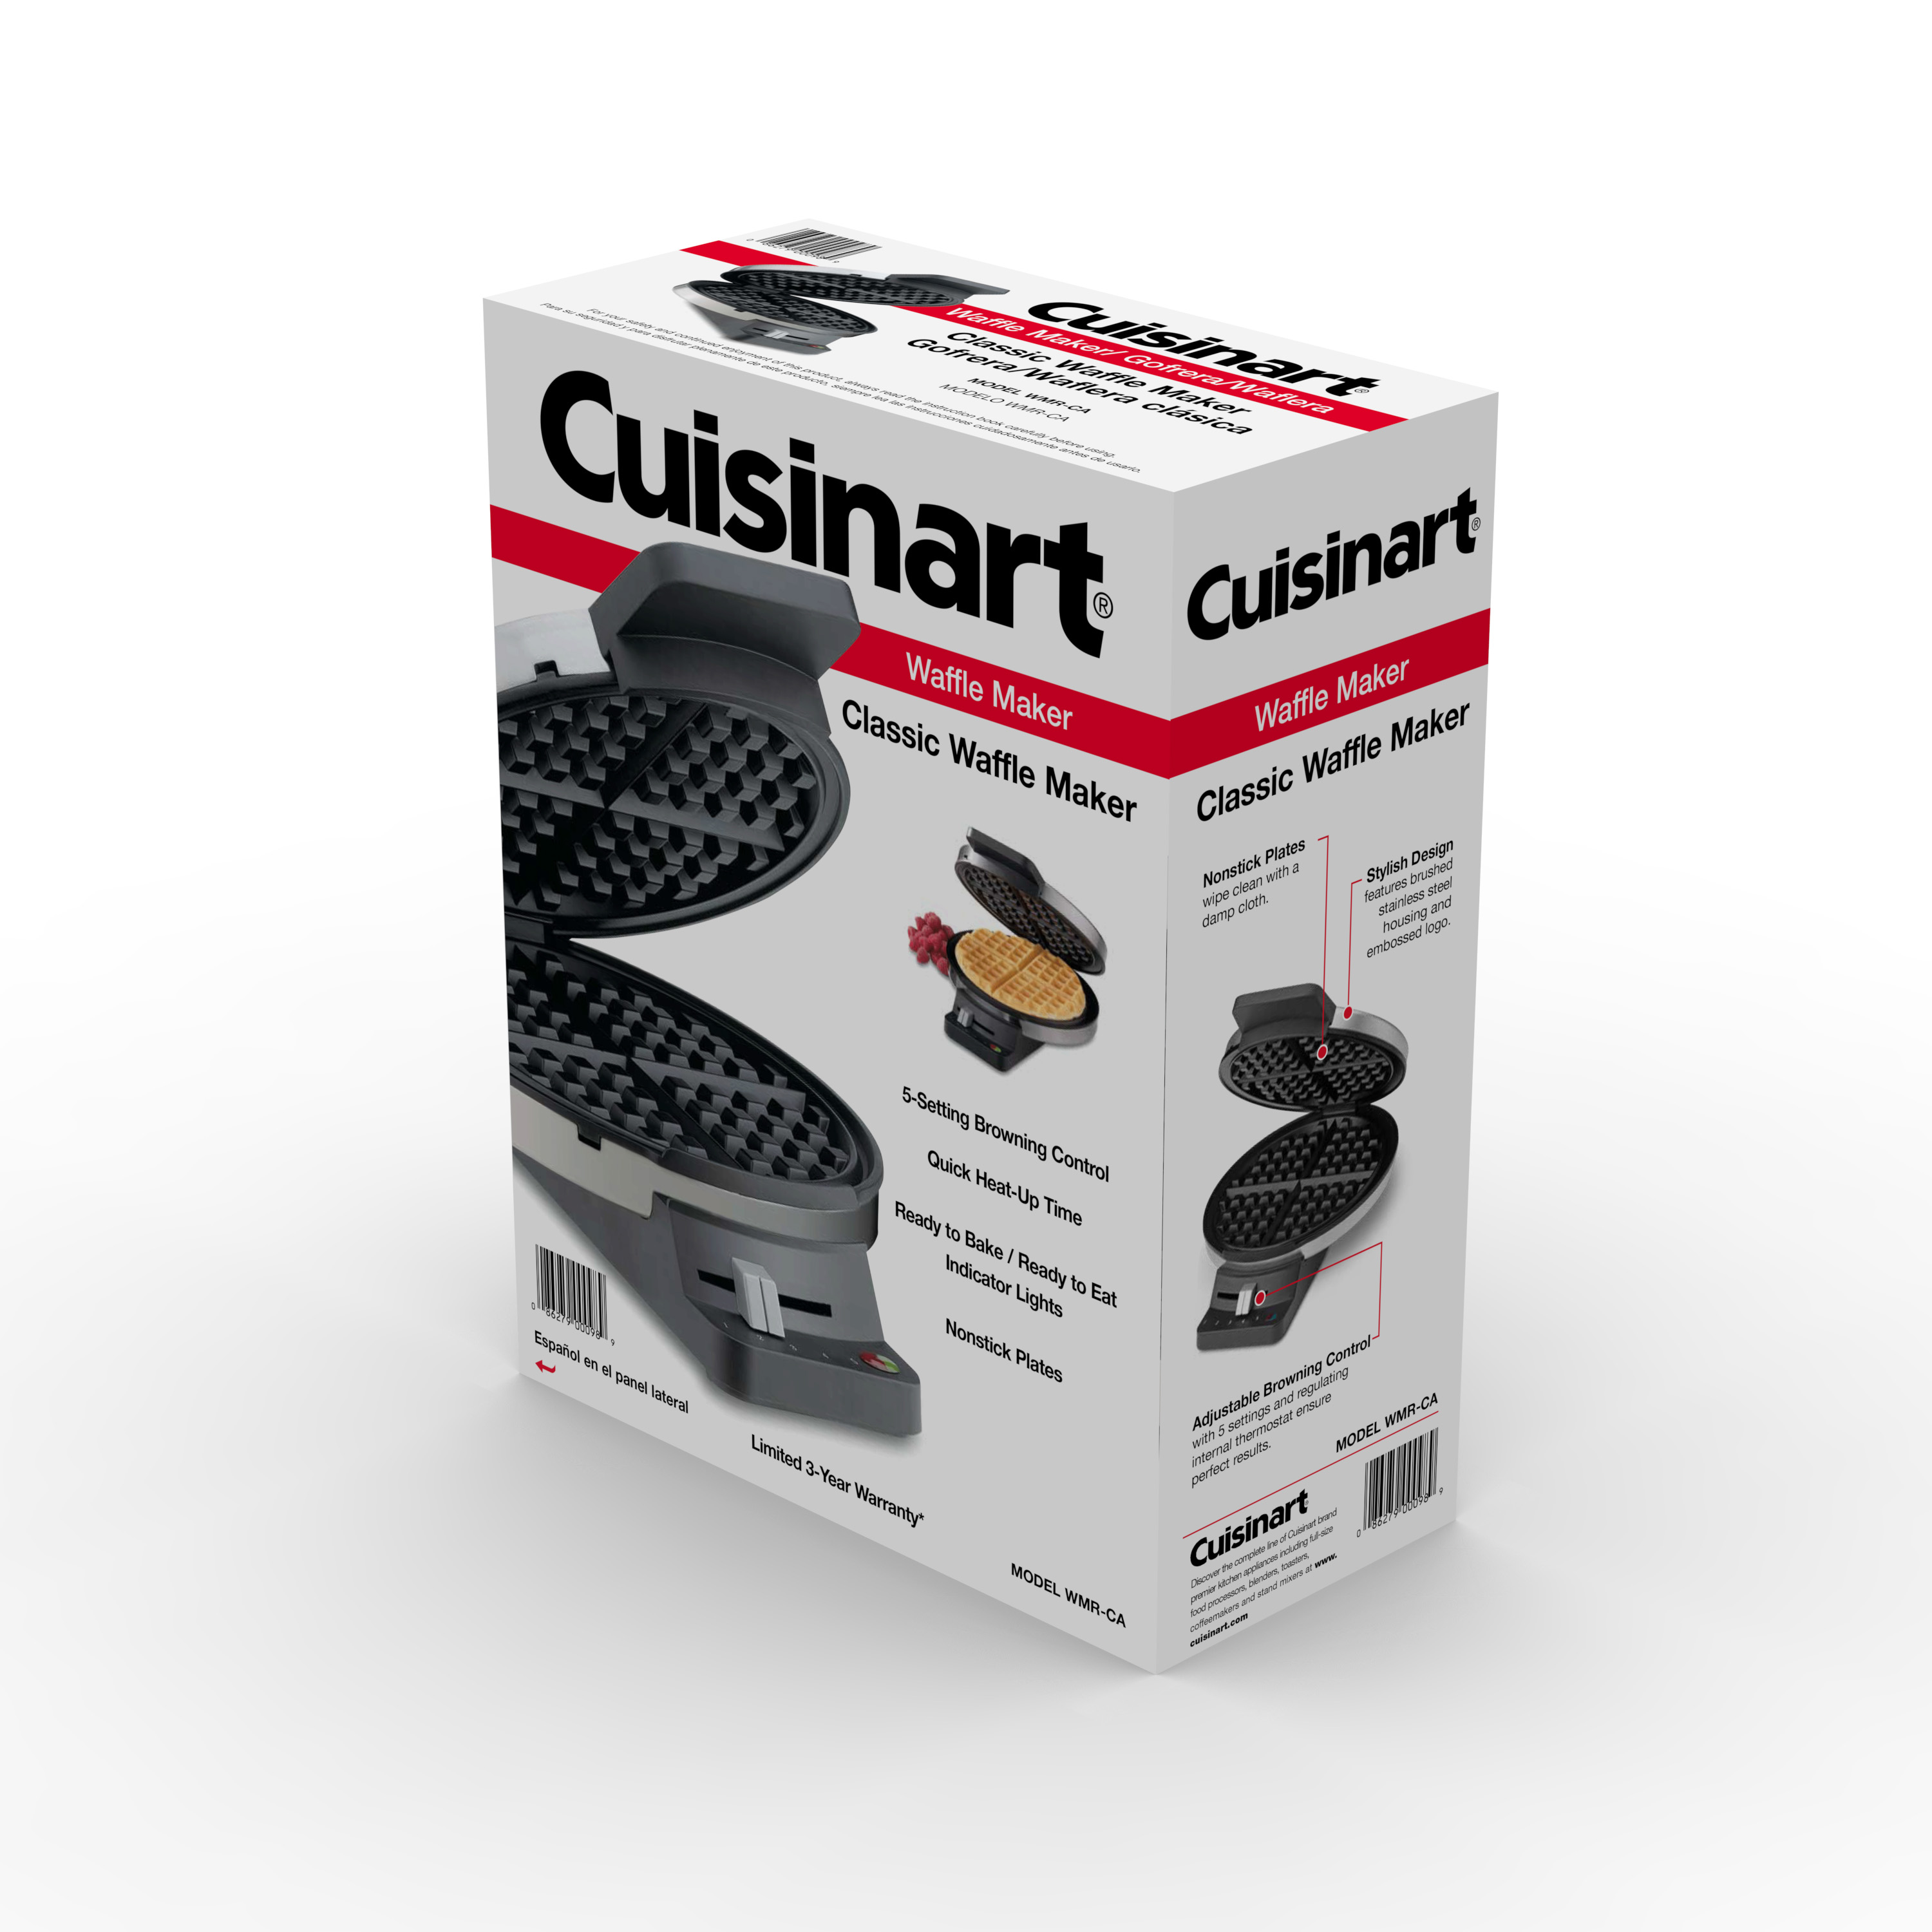 Cuisinart 1-Waffle Round Electric Waffle Maker, Stainless Steel - image 3 of 3